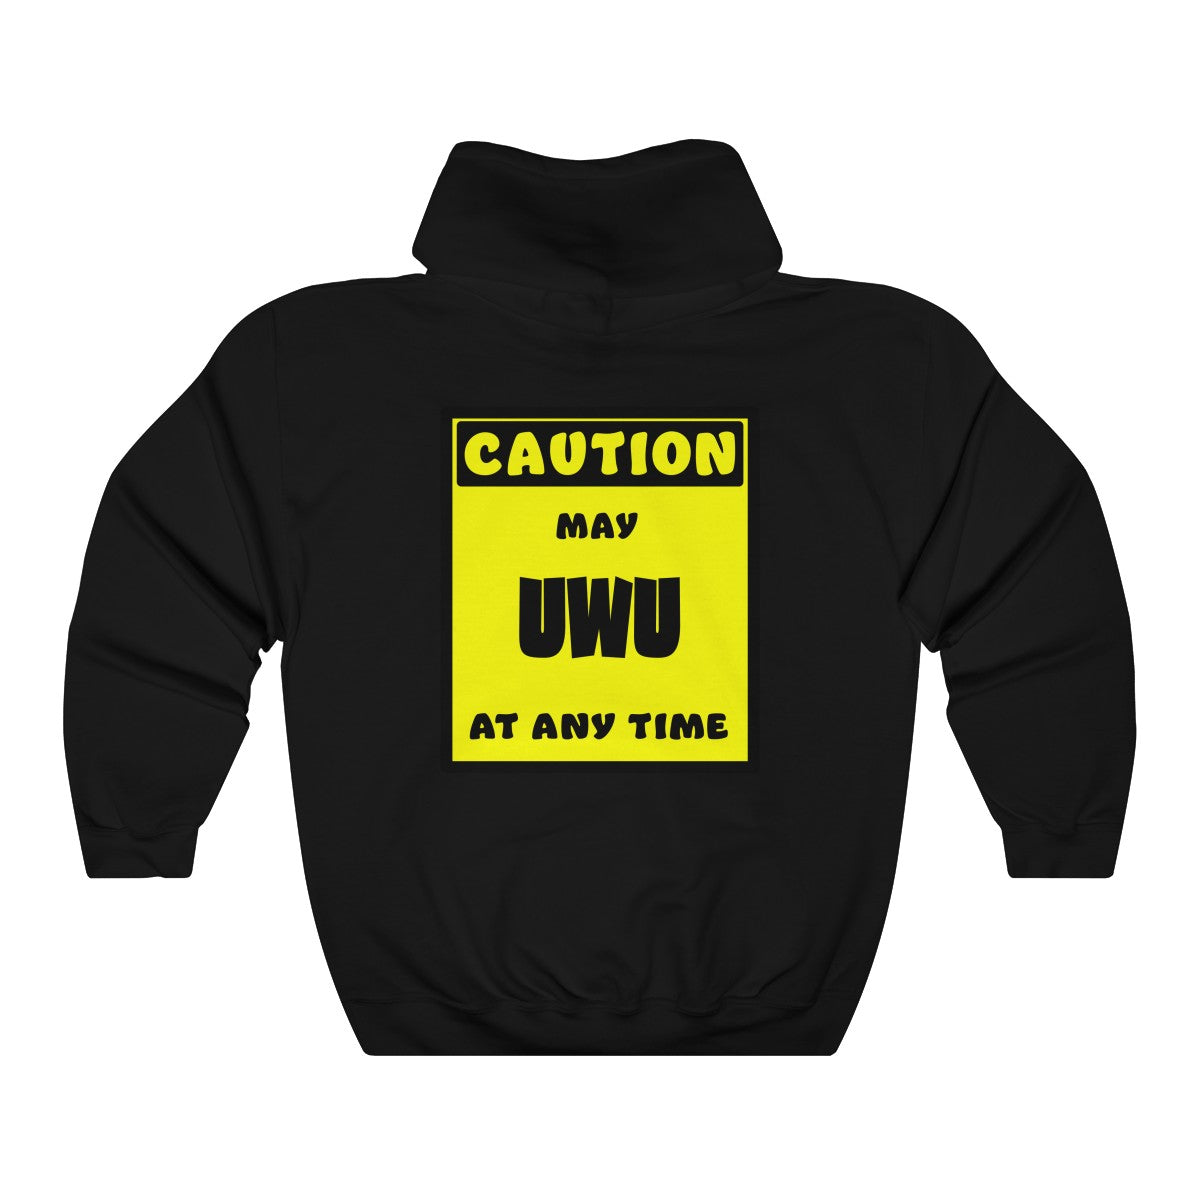 CAUTION! May UWU at any time! - Hoodie Hoodie AFLT-Whootorca Black S 